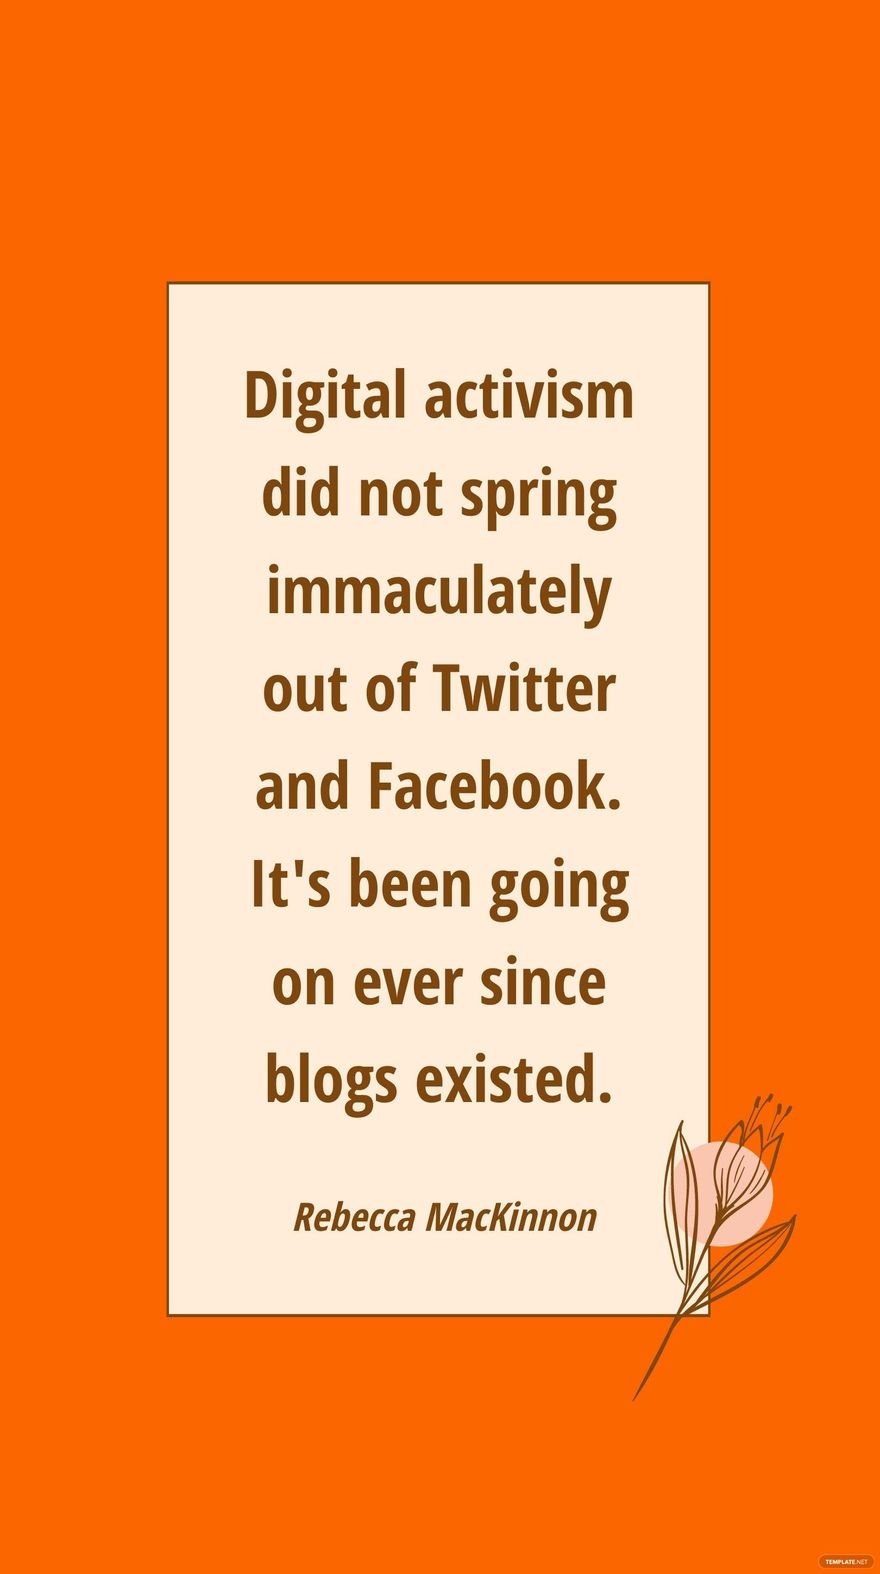 Rebecca MacKinnon - Digital activism did not spring immaculately out of Twitter and Facebook. It's been going on ever since blogs existed. in JPG